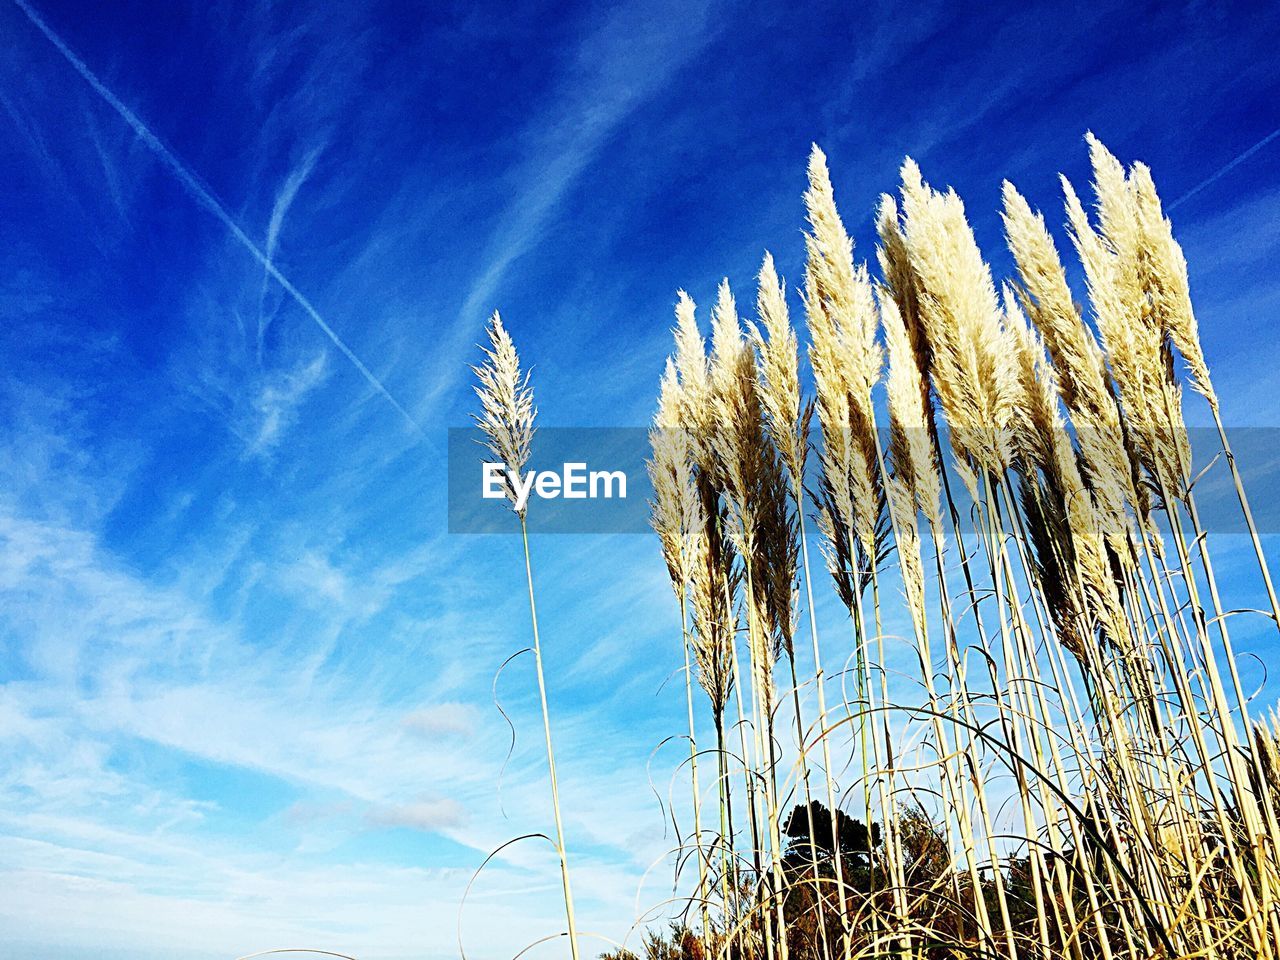 Low angle view of reeds growing against sky